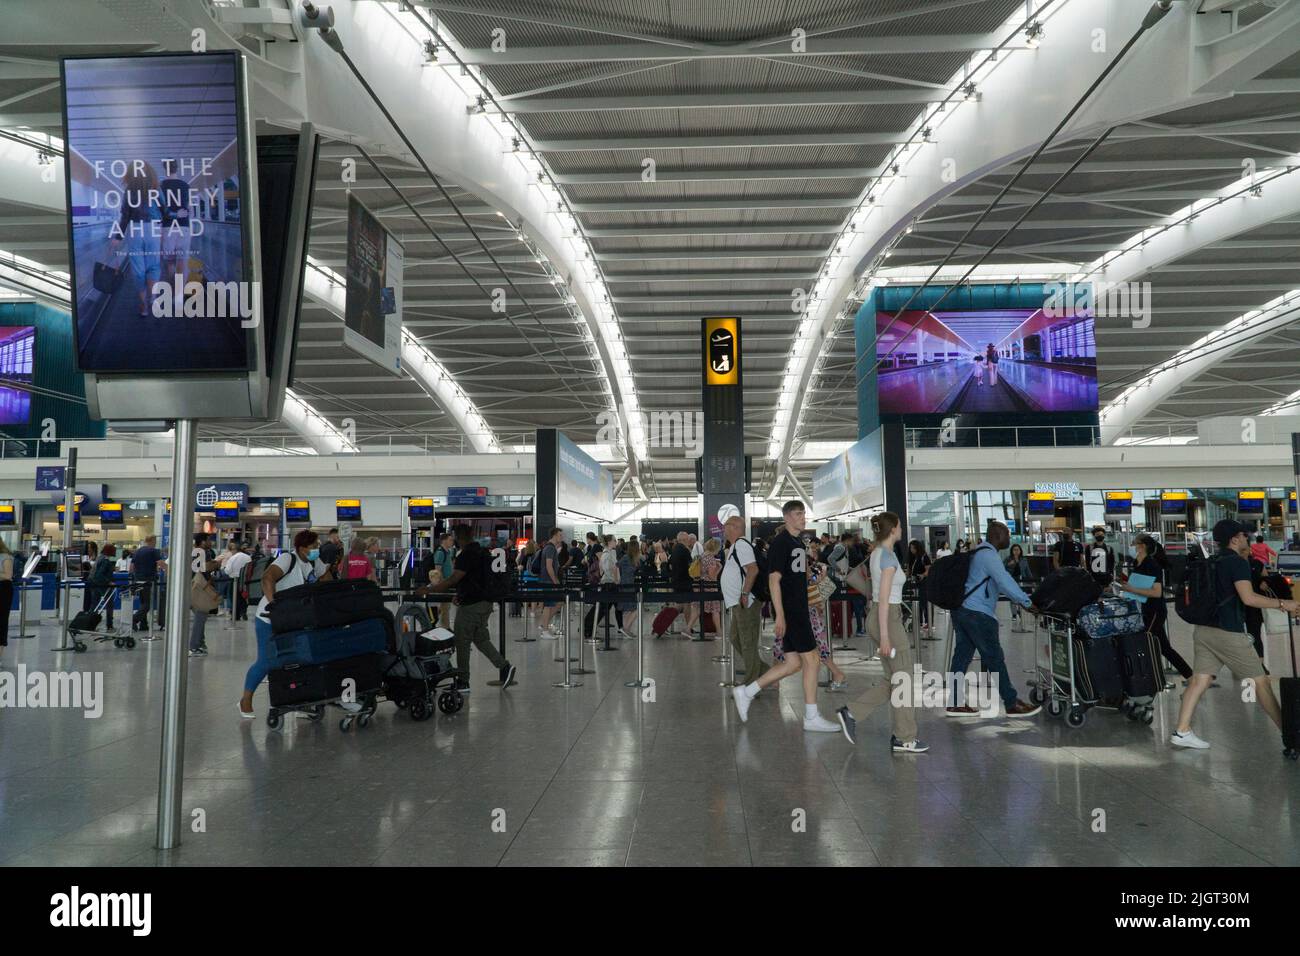 London, UK, 12 July 2022: Crowds and delays at Heathrow's terminal 5 as post-pandemic levels of travellers have left airports short of staff. Anna Watson/Alamy Live News Stock Photo